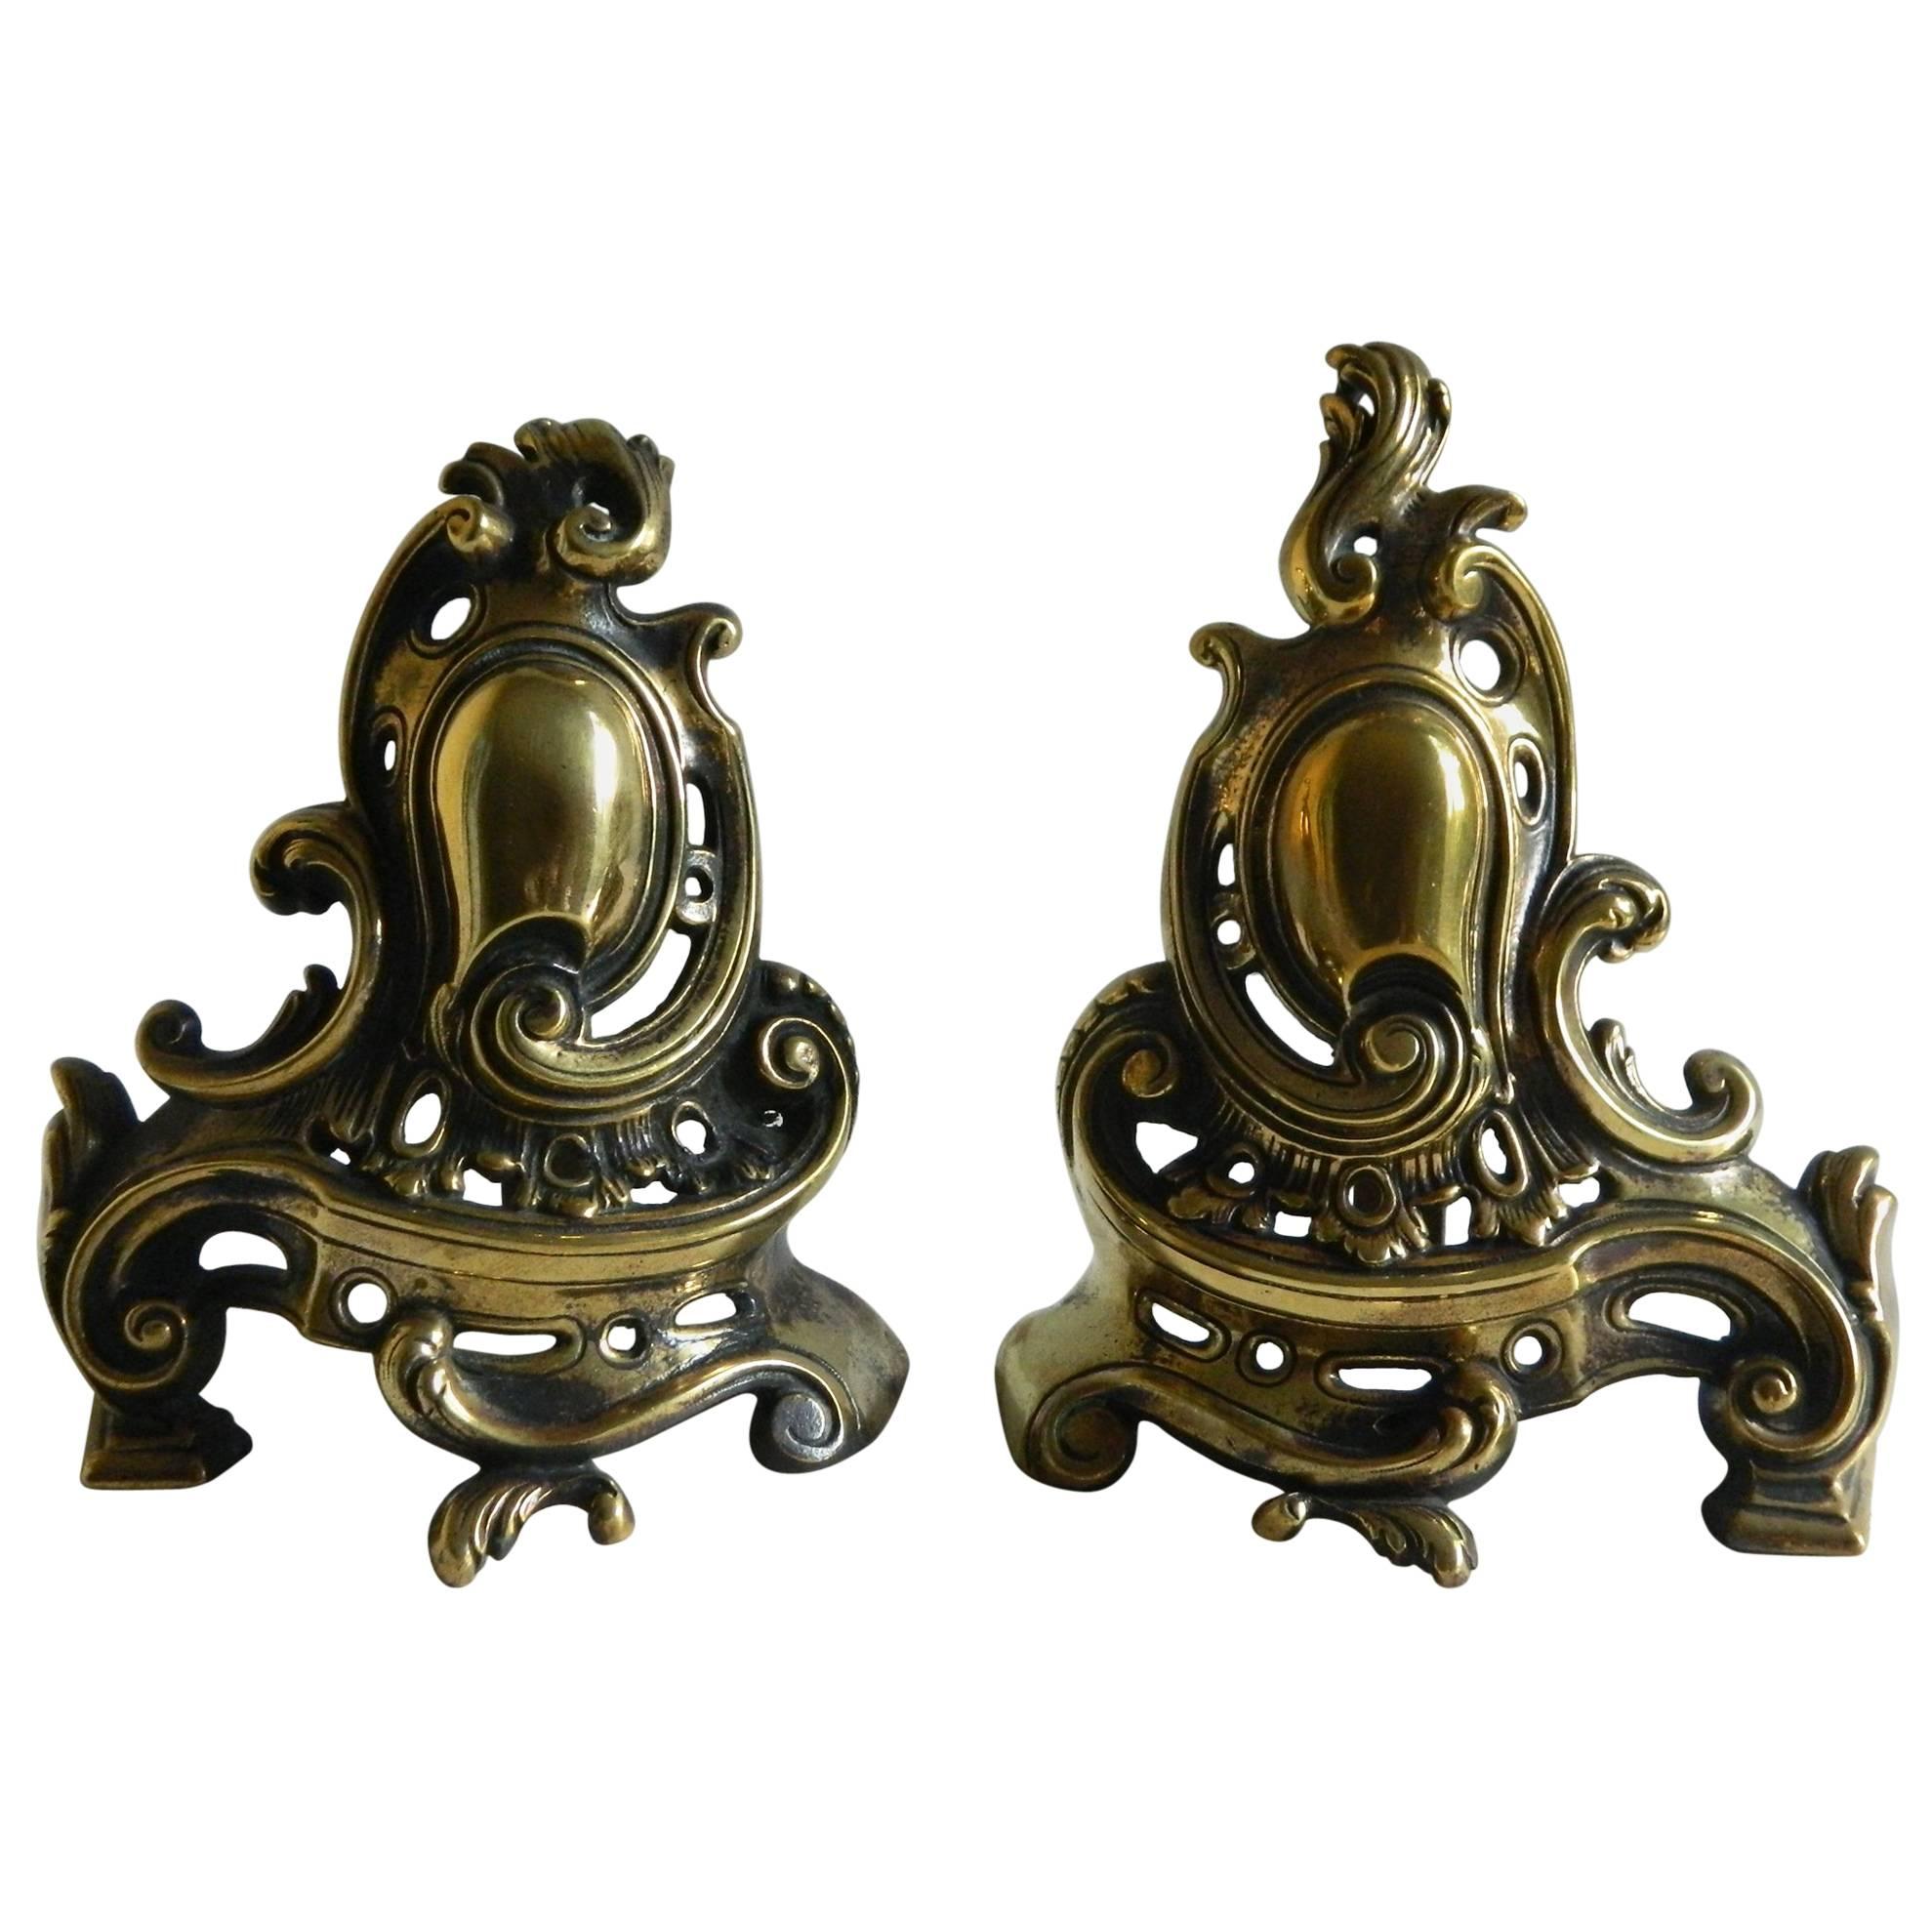 Pair of Brass Small Chenets or Andirons with Shield and Scrolls, 19th Century